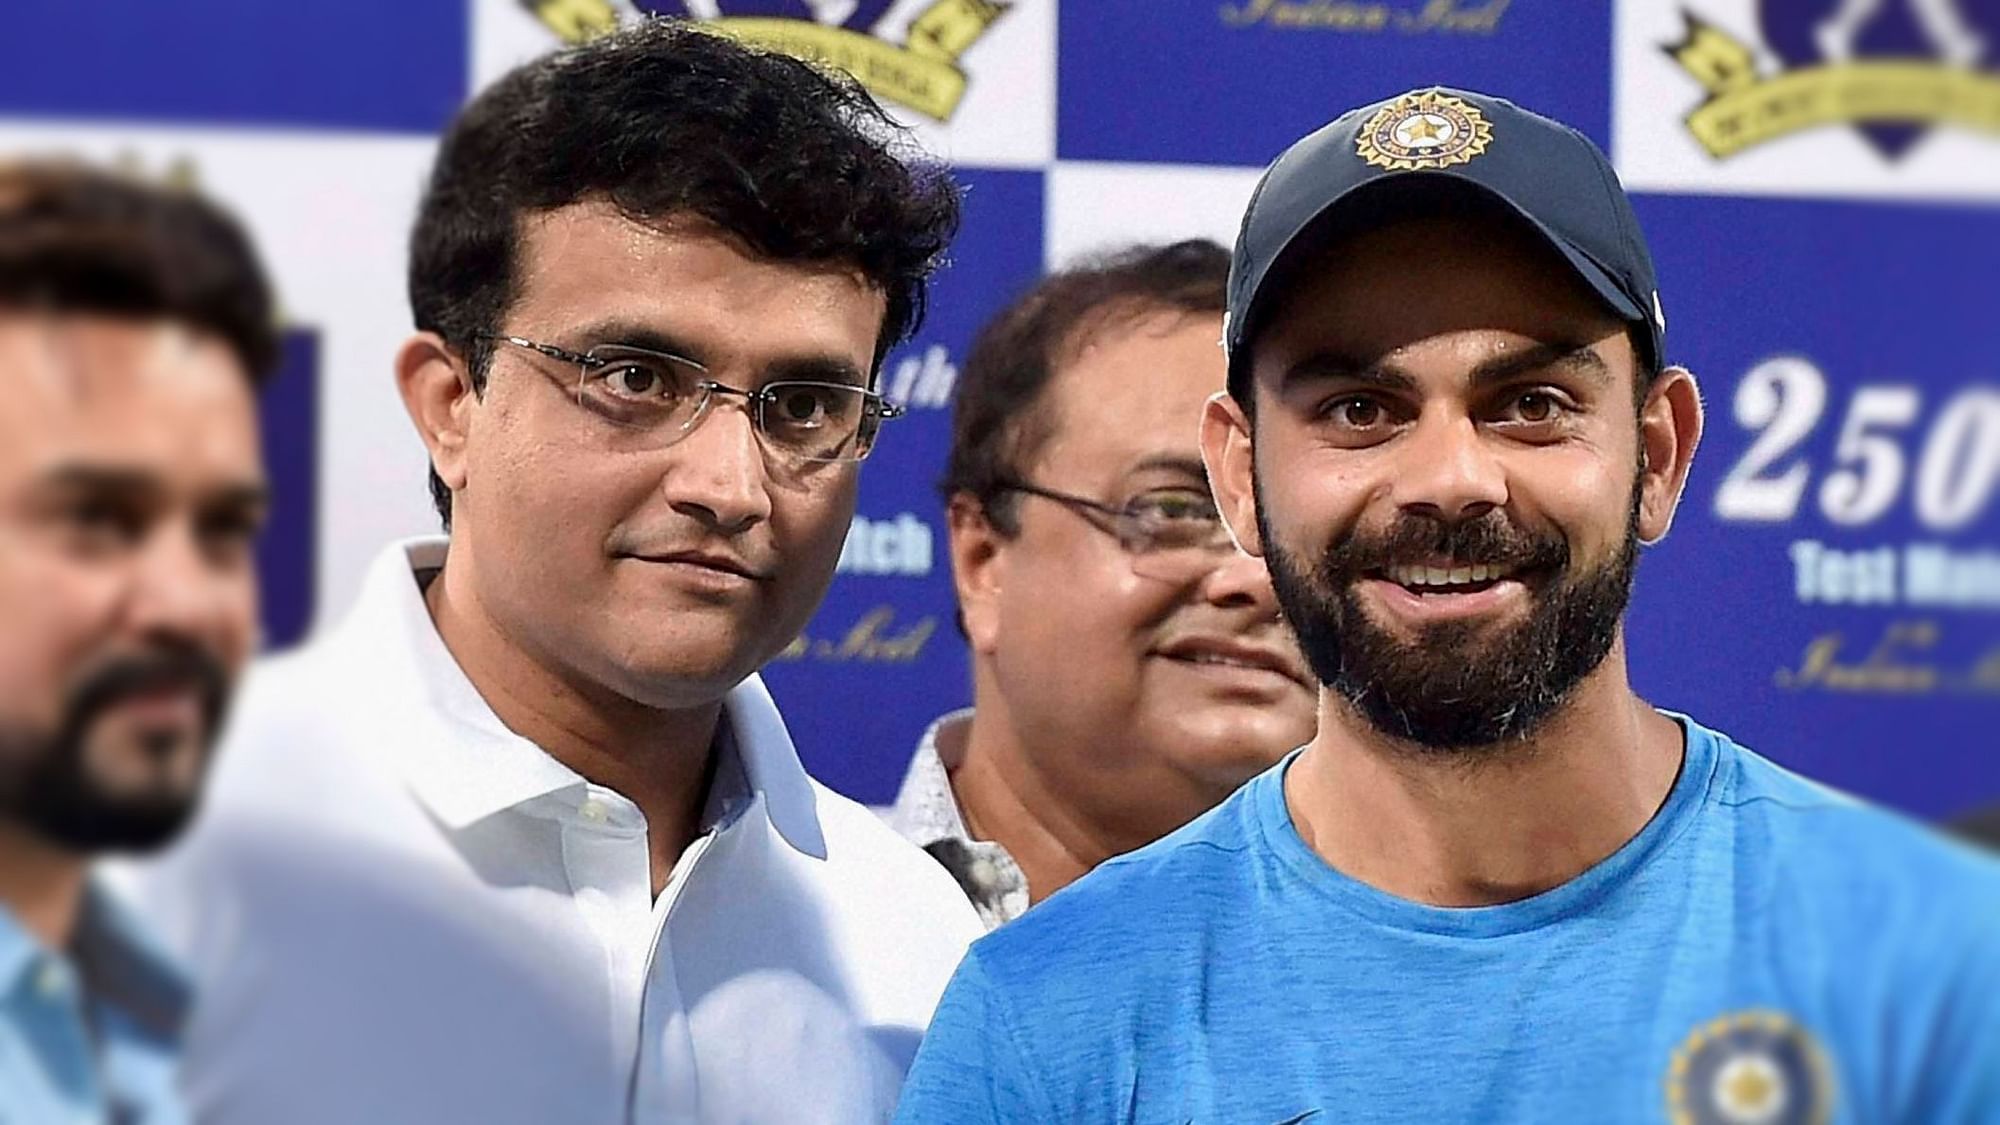 BCCI President Sourav Ganguly said Virat Kohli was the most important man in Indian cricket and he would speak to the Indian skipper.